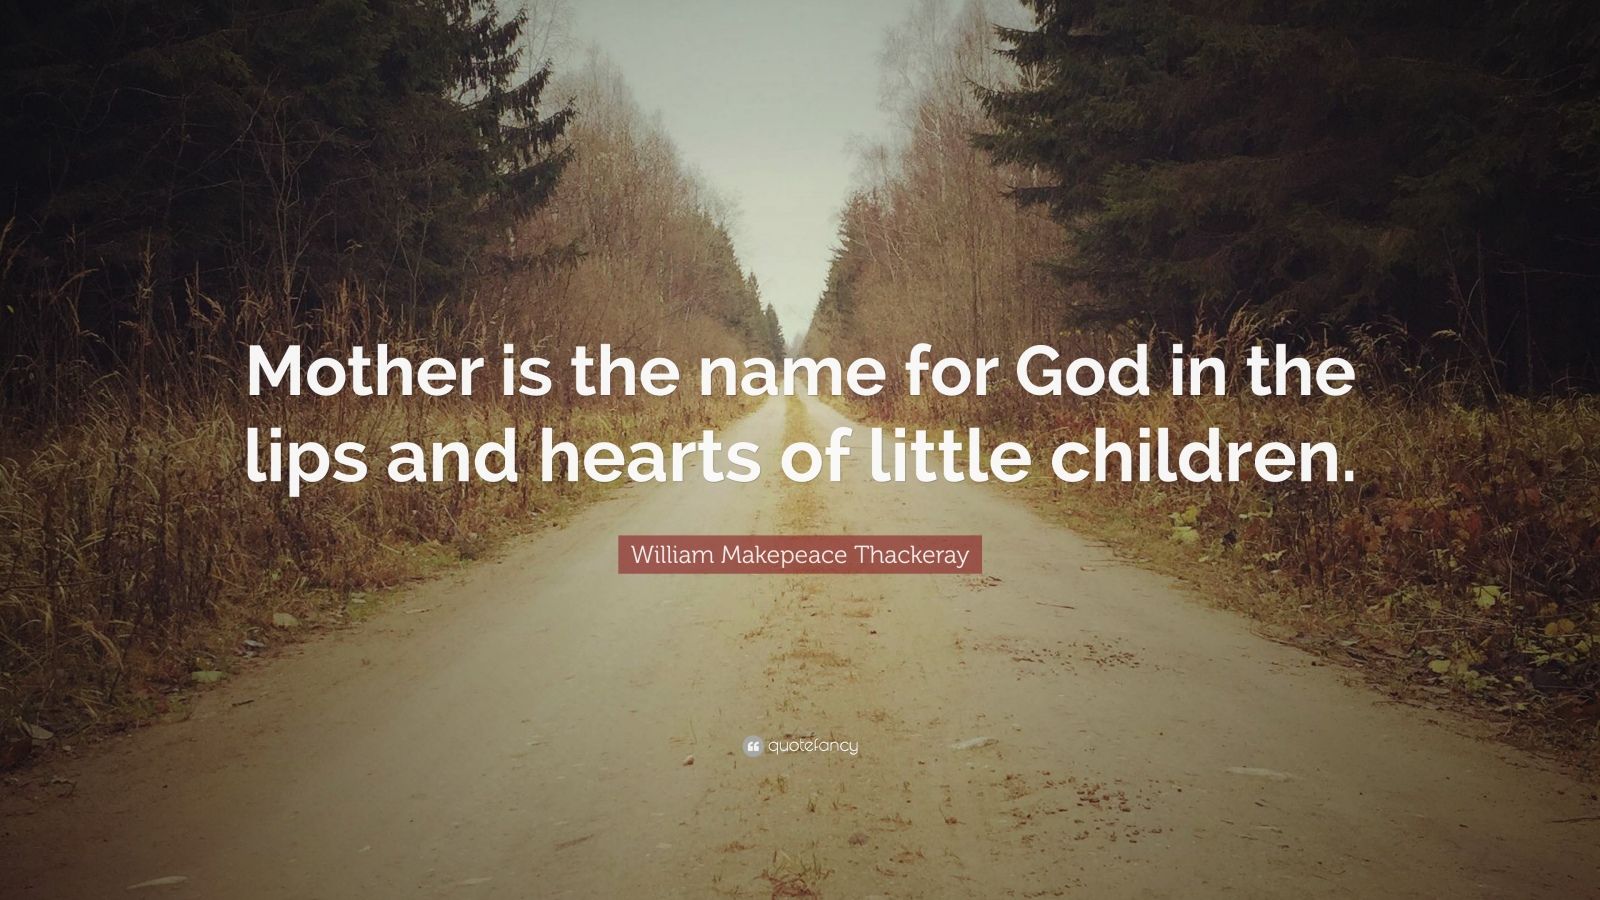 William Makepeace Thackeray Quote: “Mother is the name for God in the ...